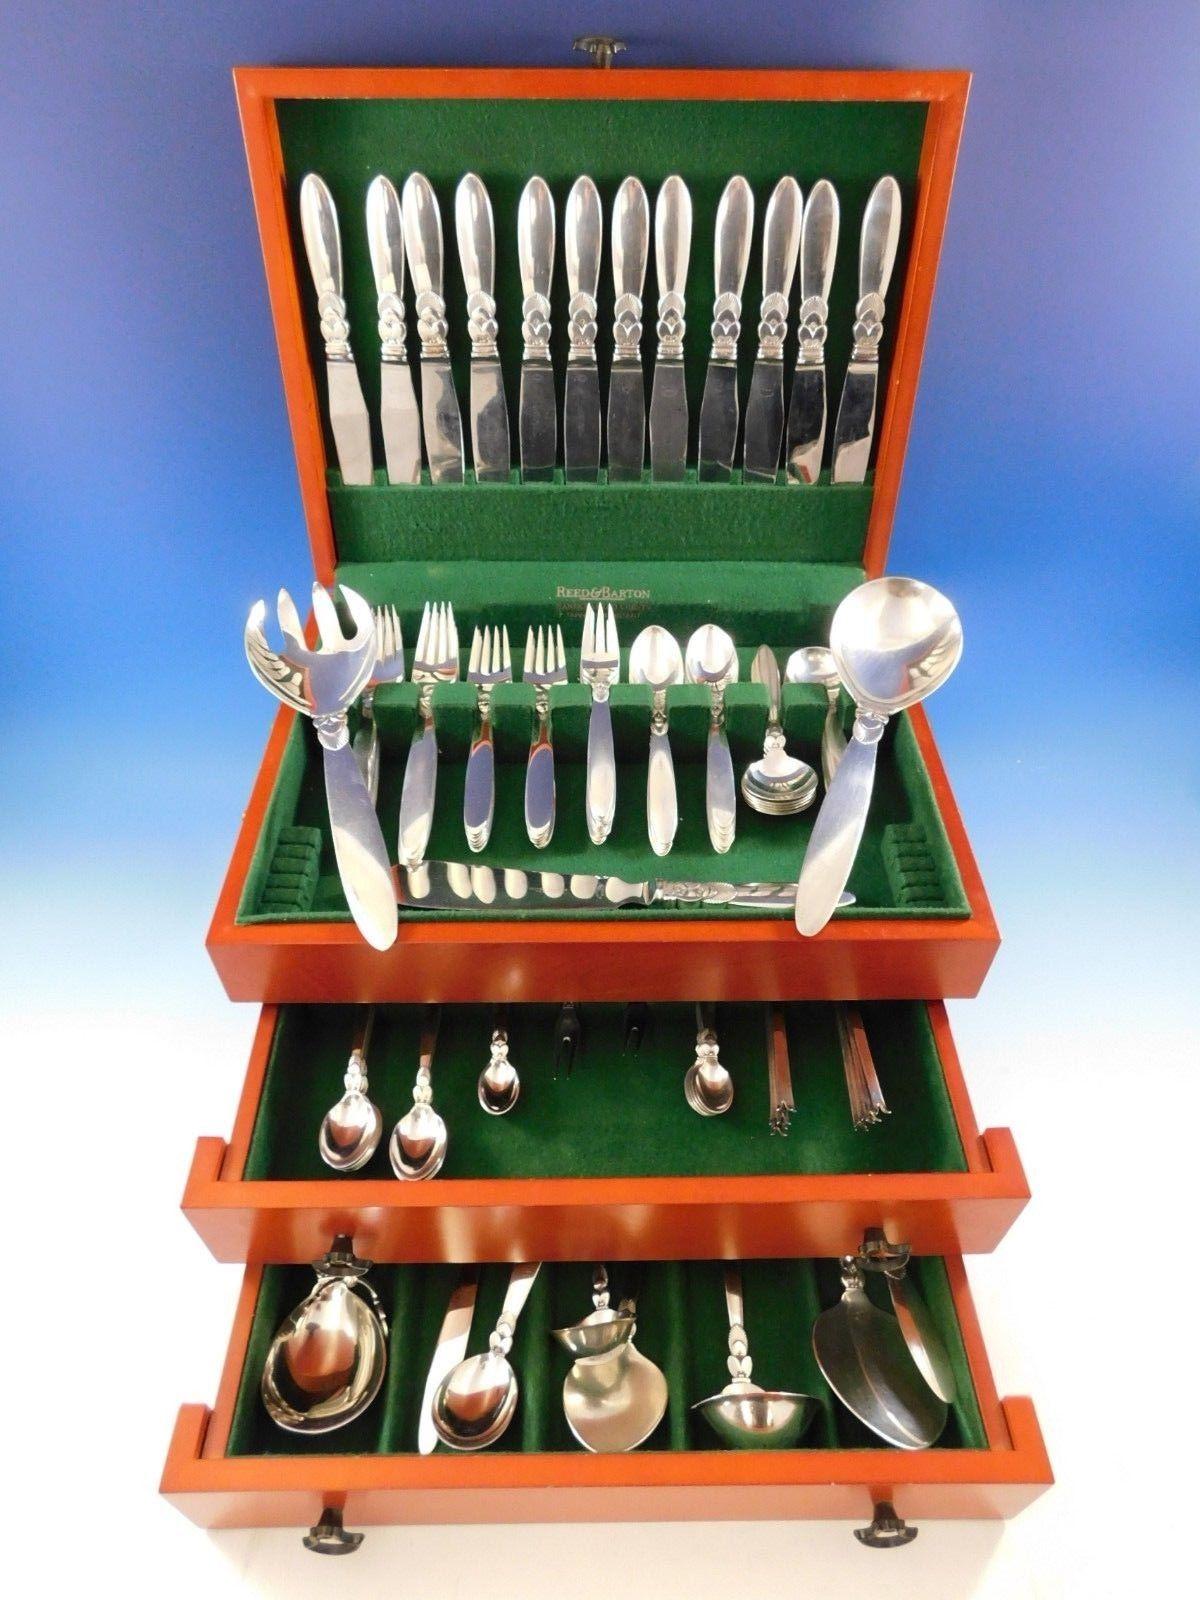 Cactus by Georg Jensen Danish sterling silver flatware set, 122 pieces. This set includes:

12 dinner knives, short handle, 8